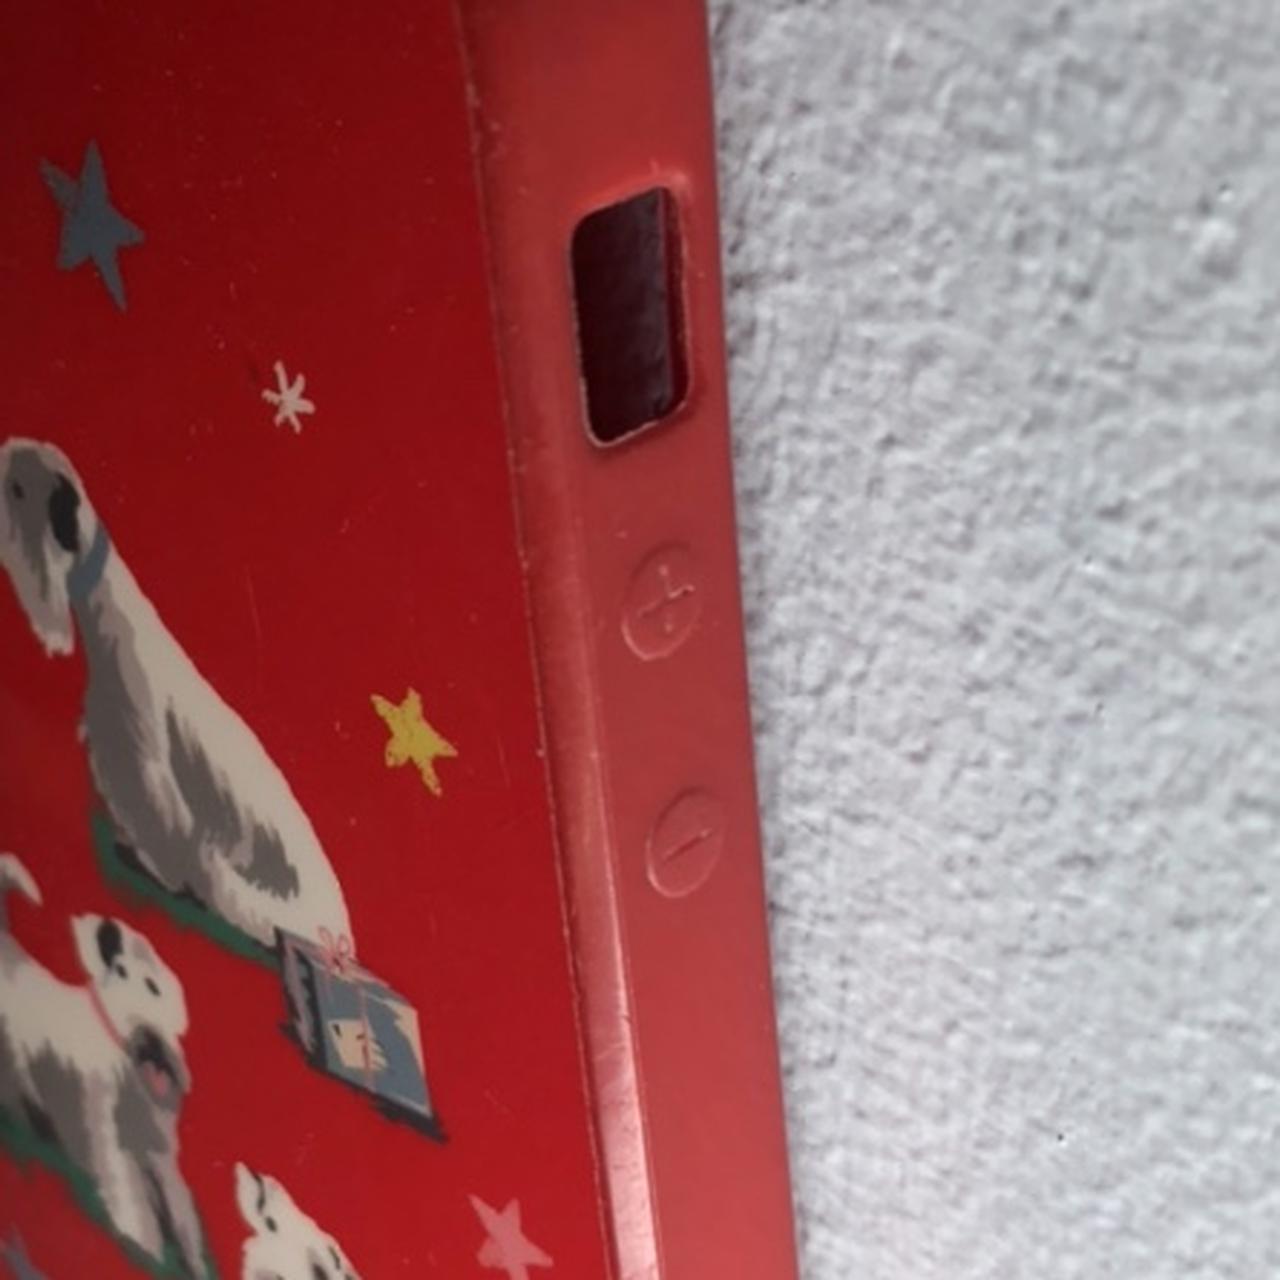 Cath Kidston Red Phone-cases (2)